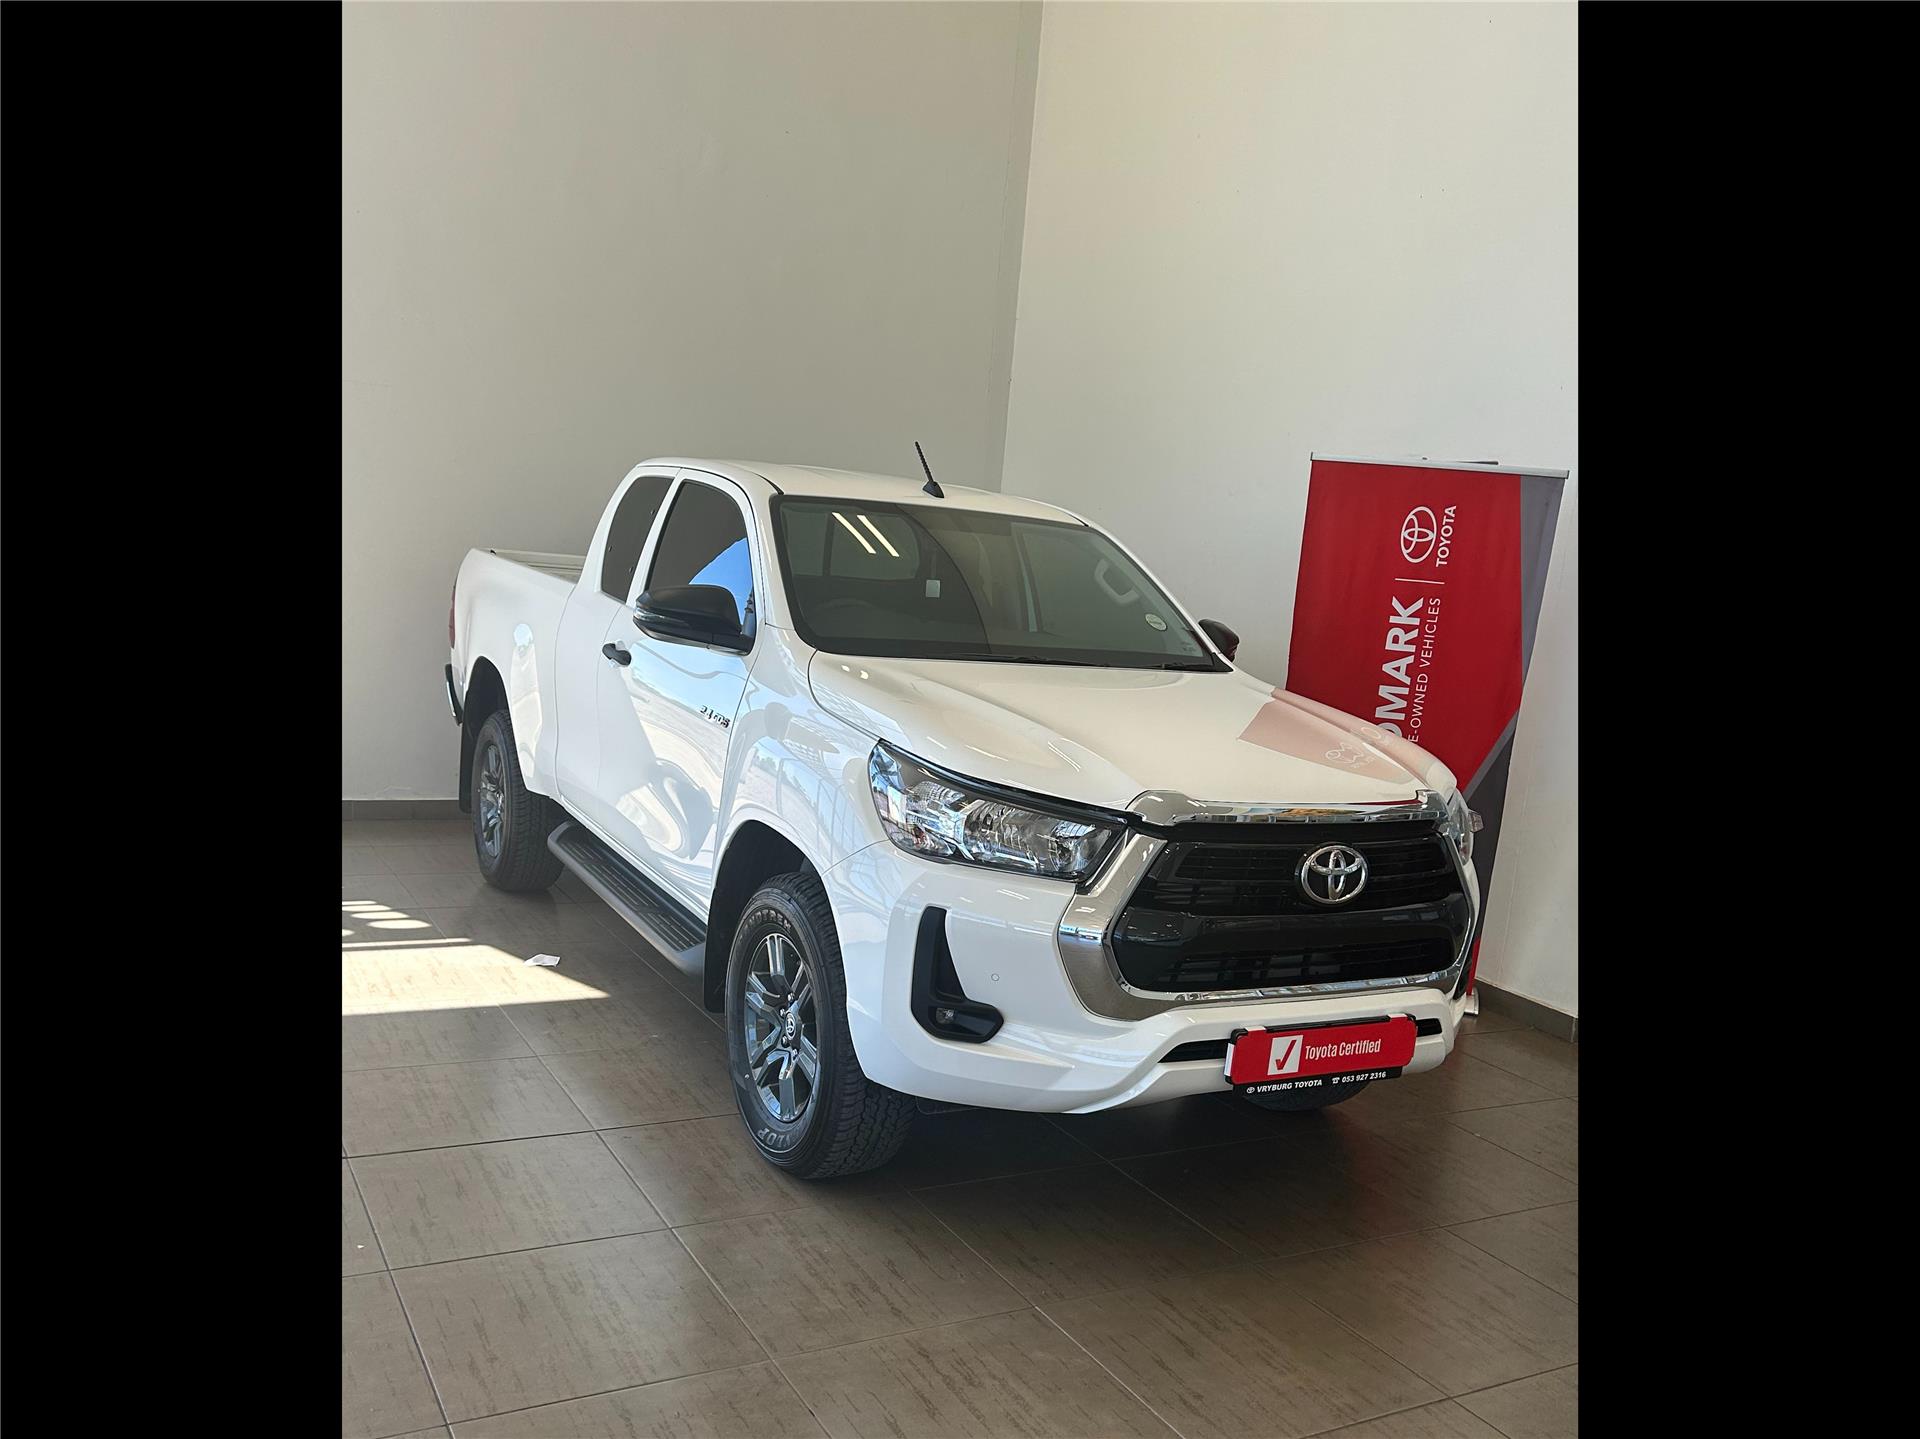 2023 Toyota Hilux Xtra Cab  for sale - 1008295/1